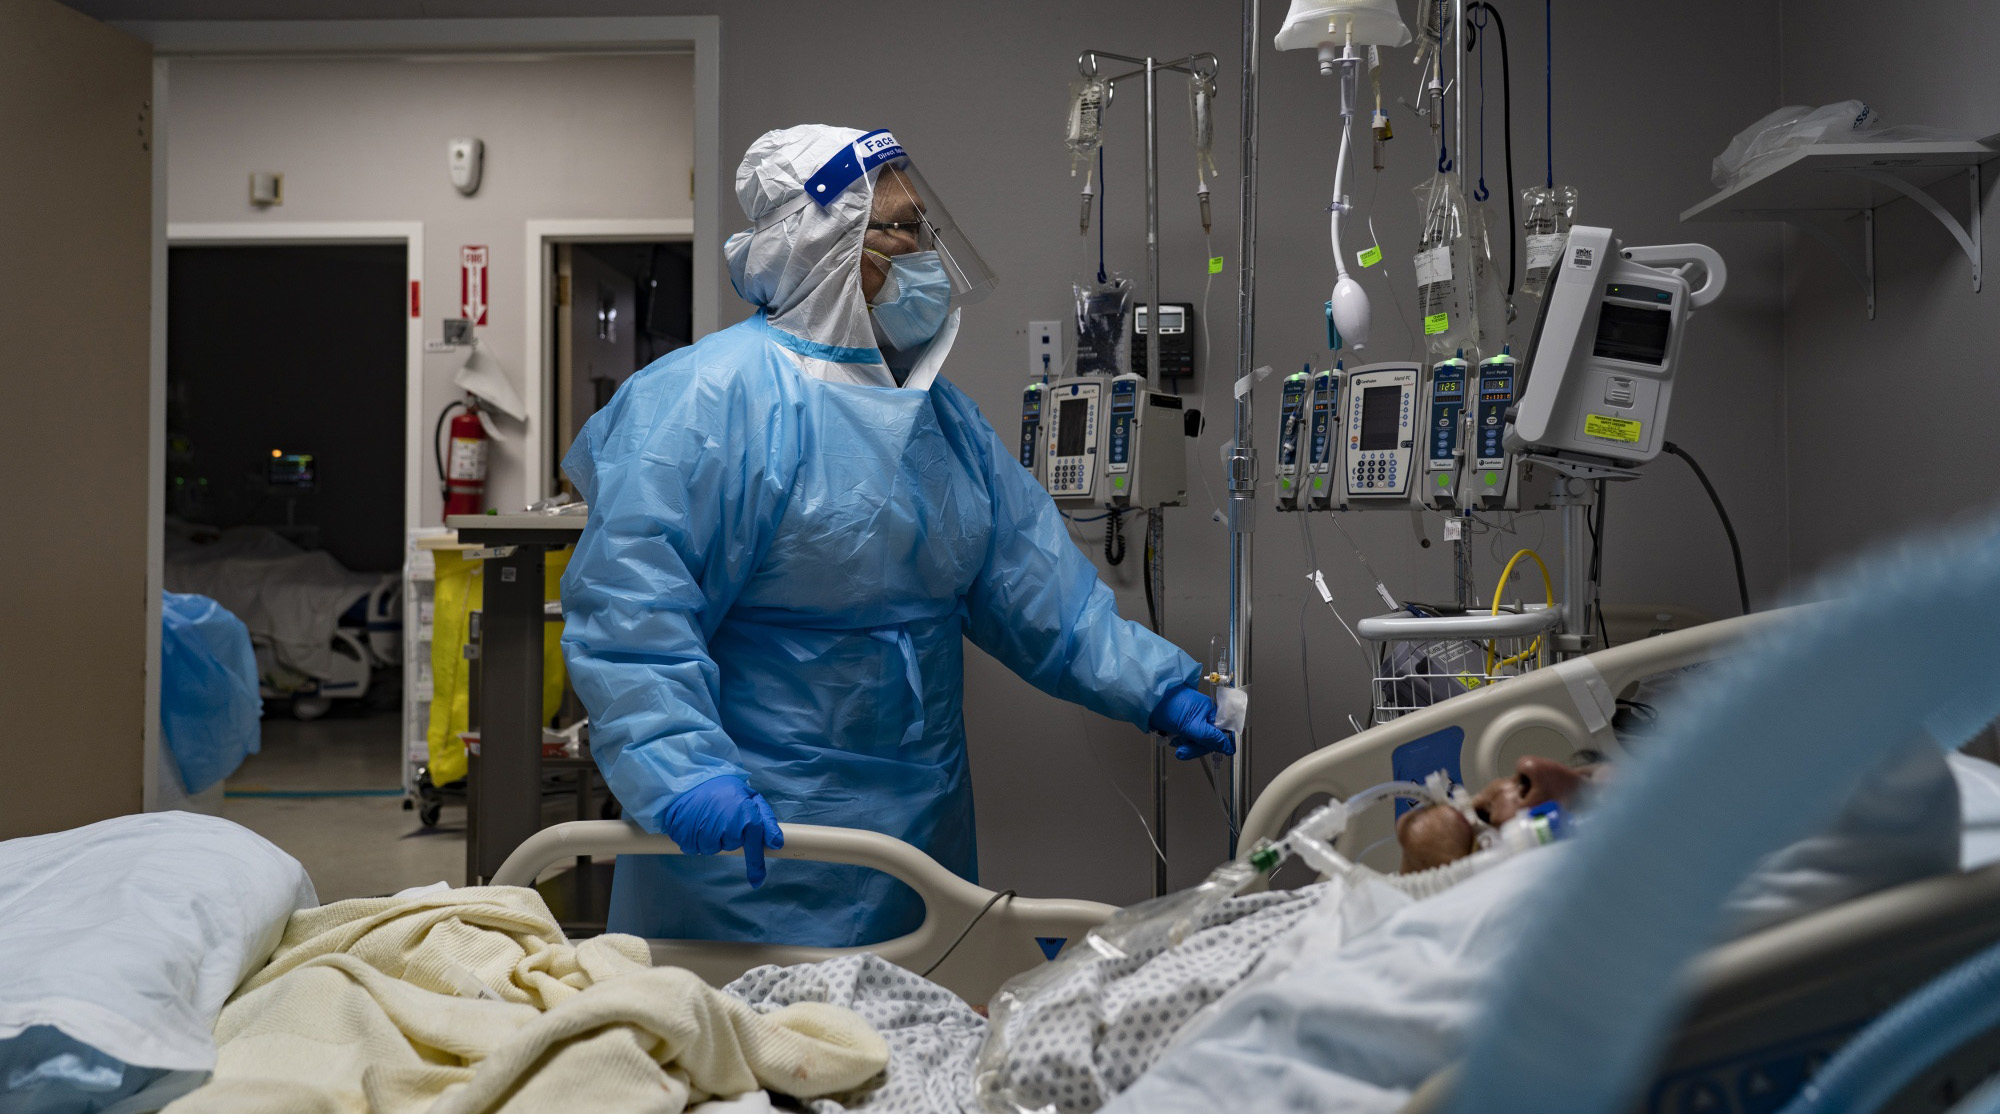 A healthcare worker treats a patient at the Covid-19 ICU of a hospital in Houston, Texas.